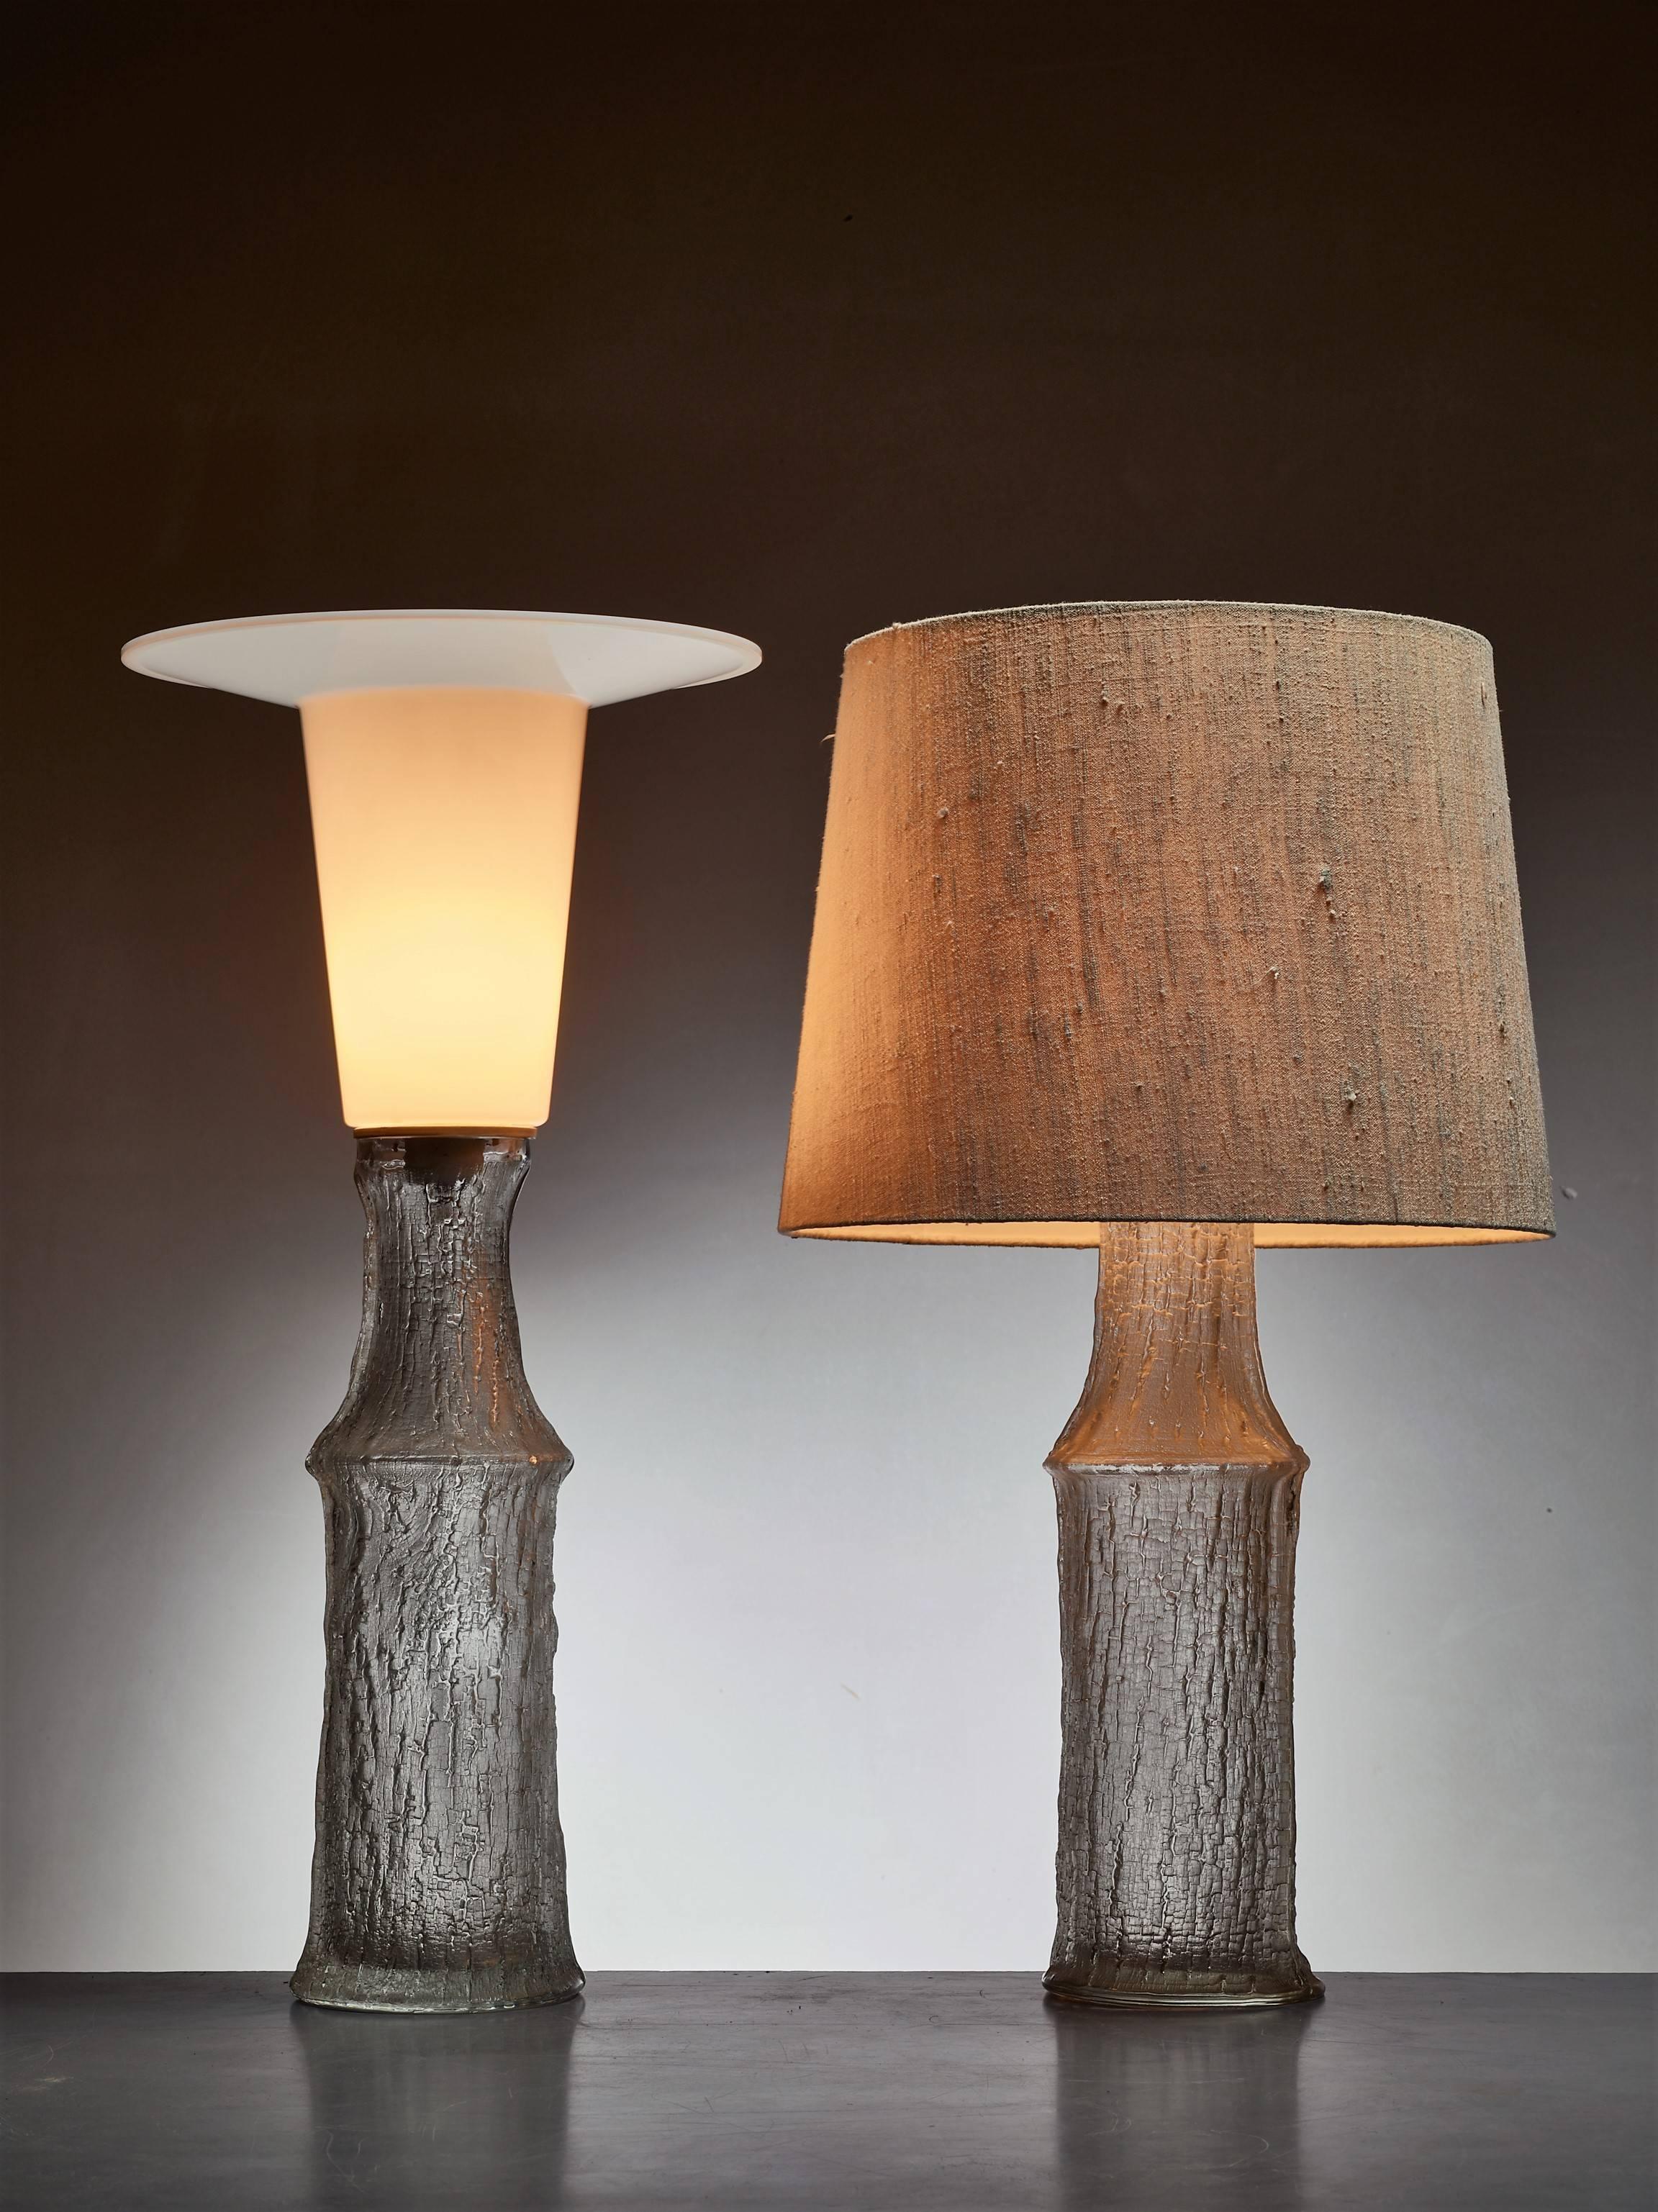 A pair of table lamps by Timo Sarpaneva for Luxus. The lamps are made of molded Iittala glass with a plastic diffuser on top.

We have two original shades, each with different fabric. The original shades can be customized with a new fabric.

* This